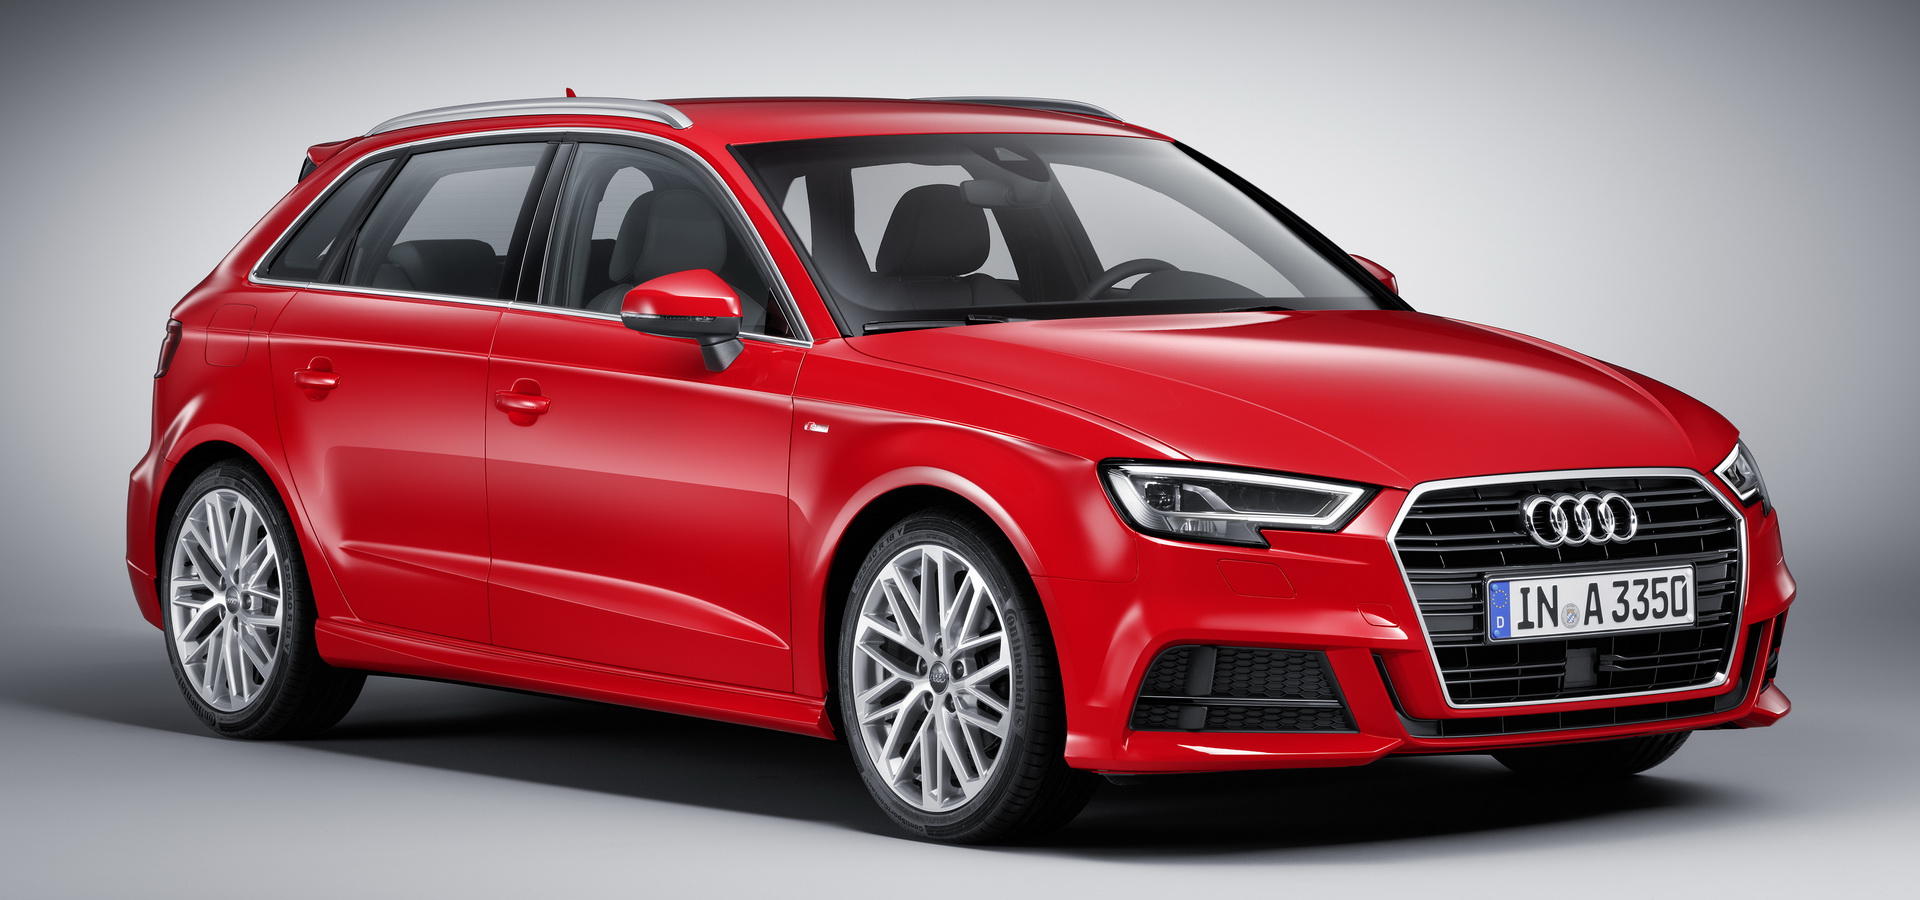 How Does The All-New Audi A3 Sportback Compare To Its Predecessor?